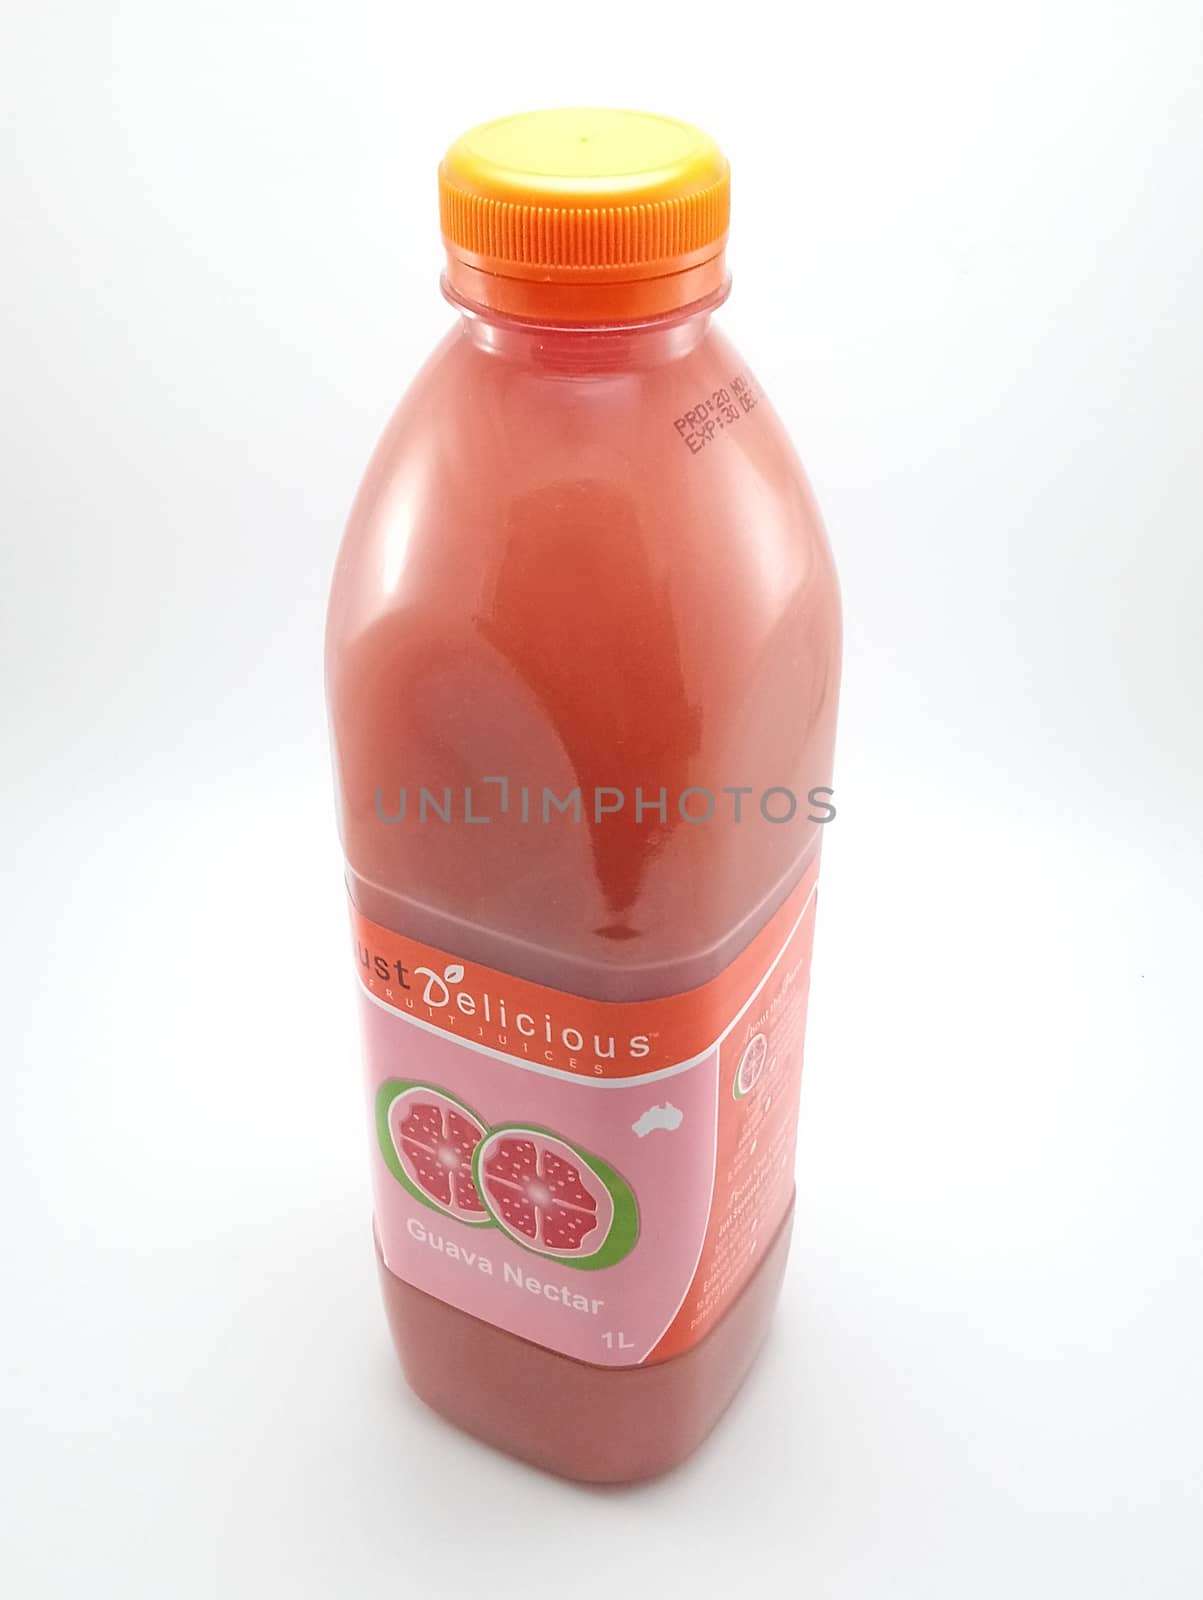 MANILA, PH - SEPT 25 - Just delicious guava nectar juice on September 25, 2020 in Manila, Philippines.